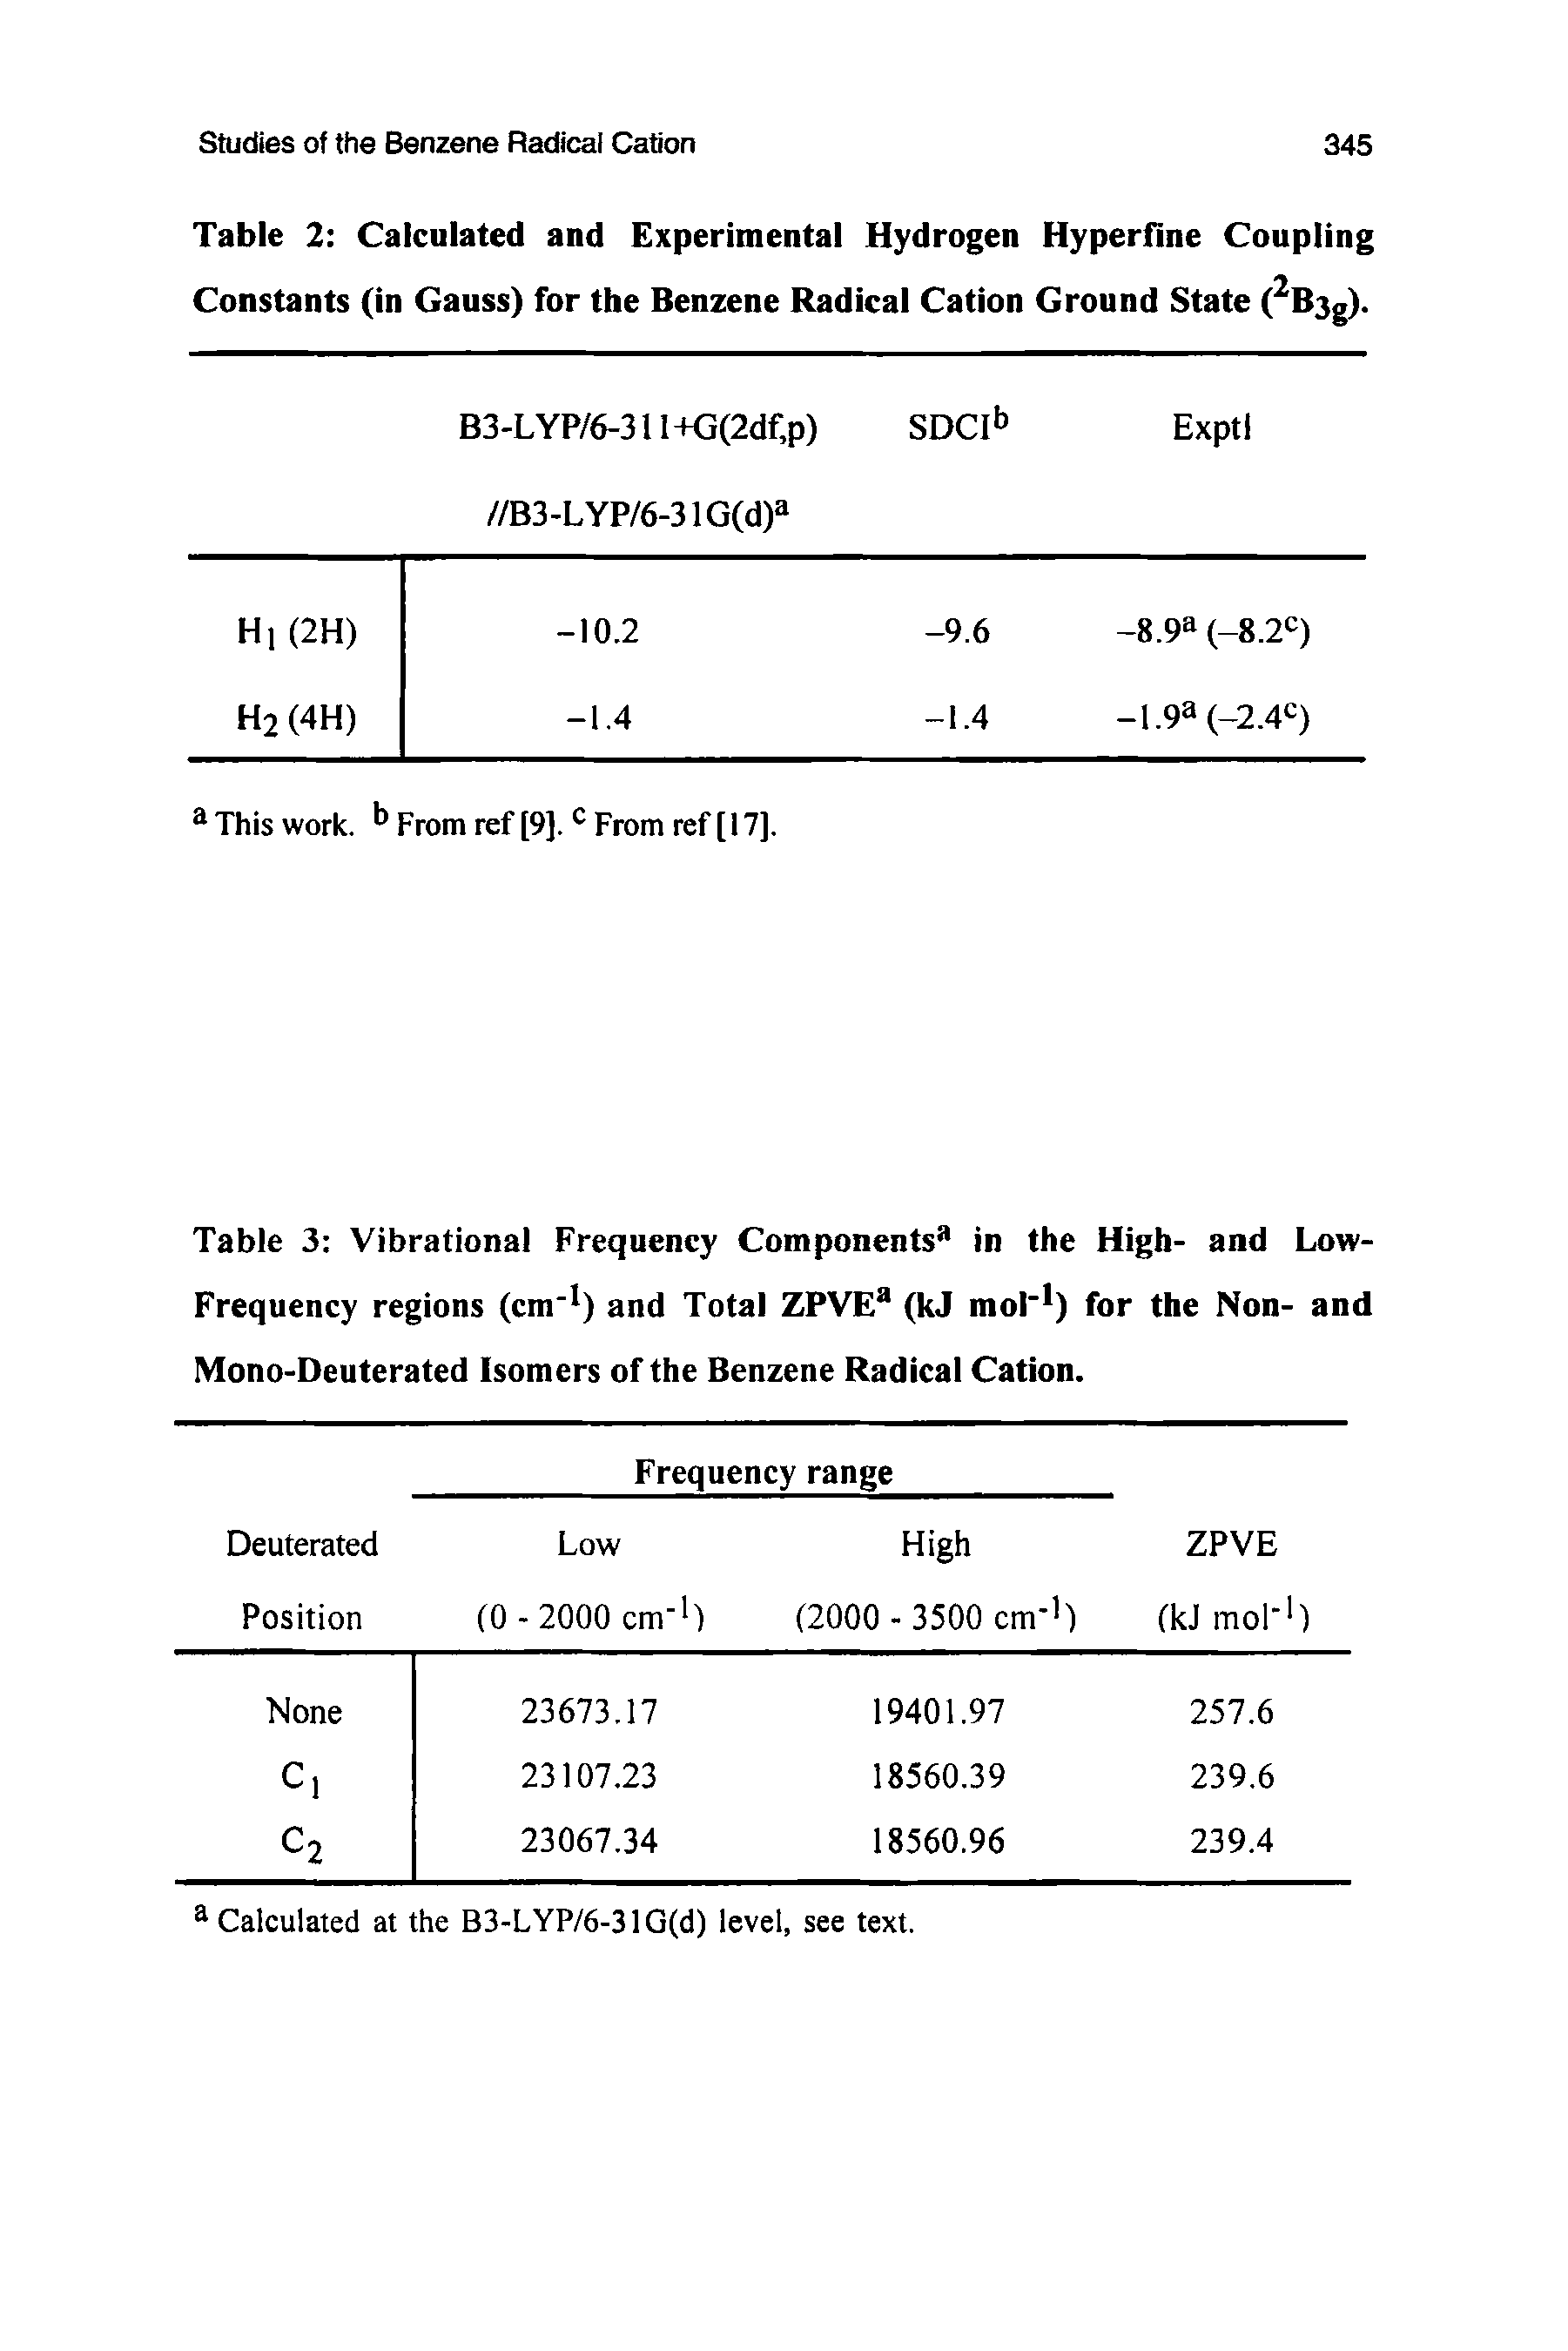 Table 3 Vibrational Frequency Components in the High- and Low-Frequency regions (cm ) and Total ZPVE (kJ mol ) for the Non- and Mono-Deuterated Isomers of the Benzene Radical Cation.